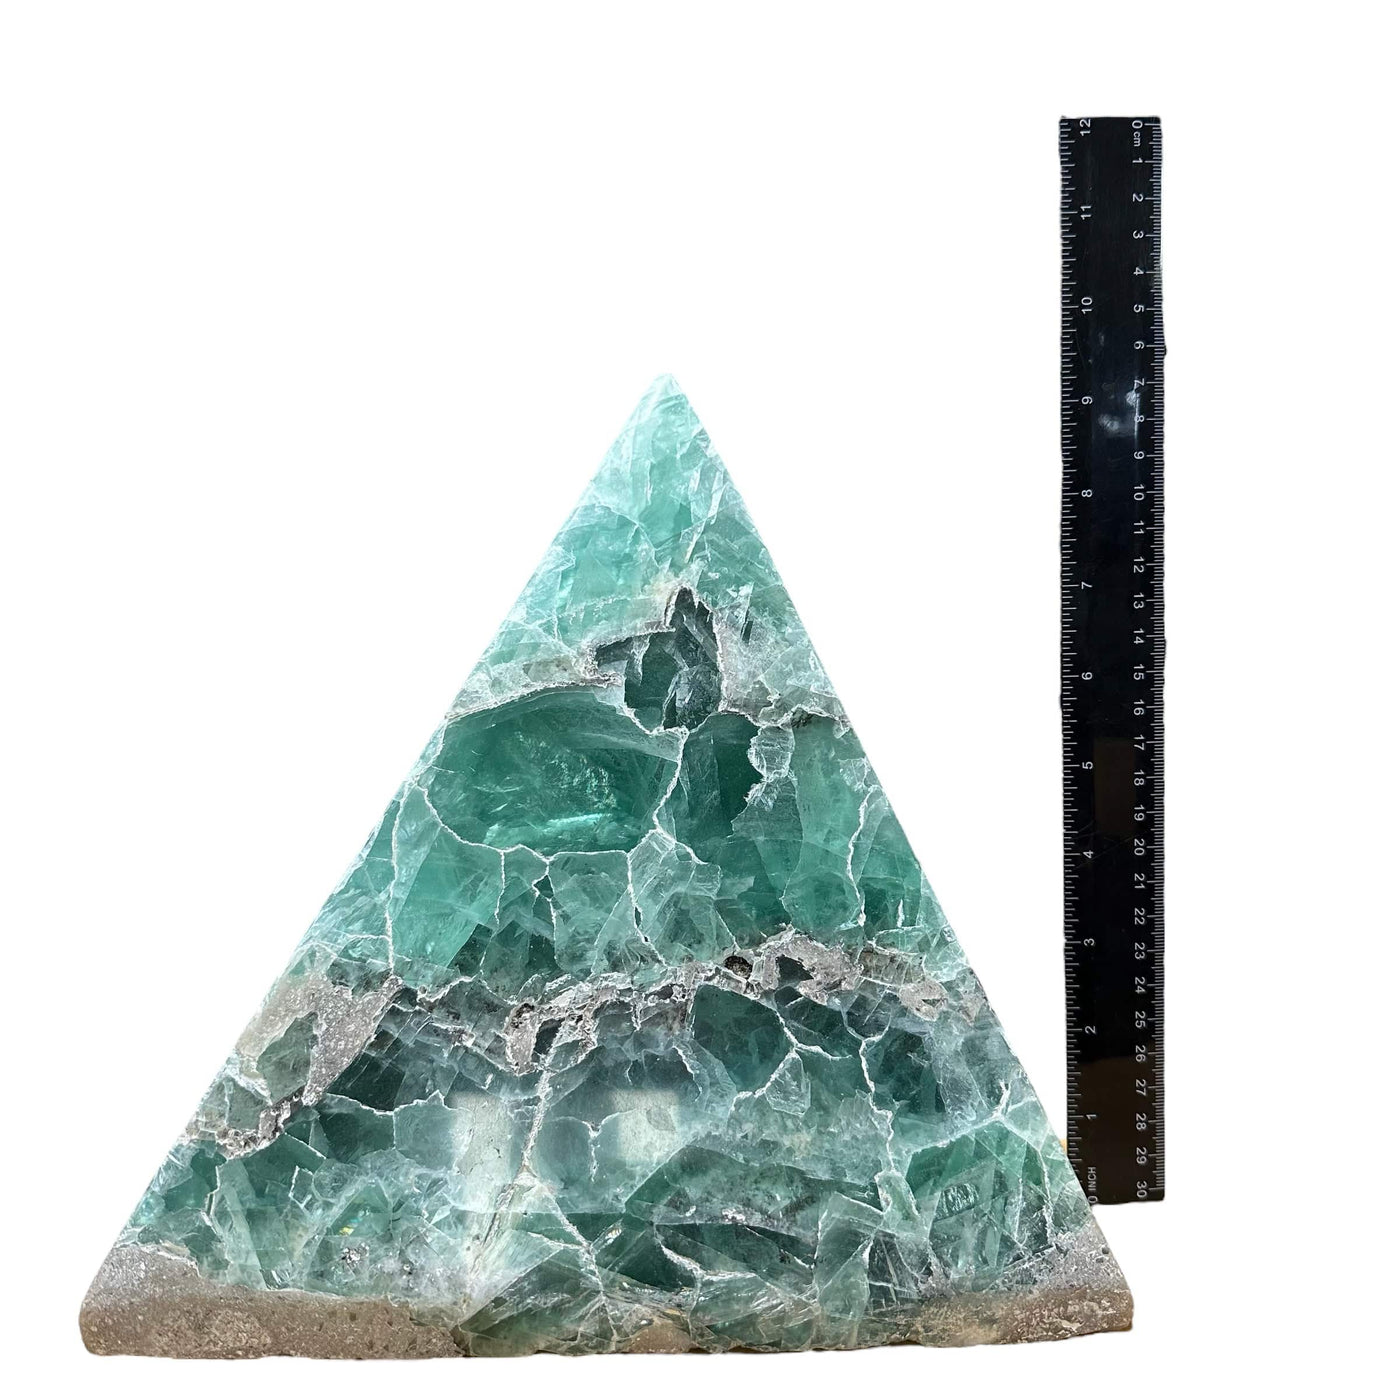 Large green fluorite pyramid on a white background with a ruler next to it showing it is about 11 inches tall.